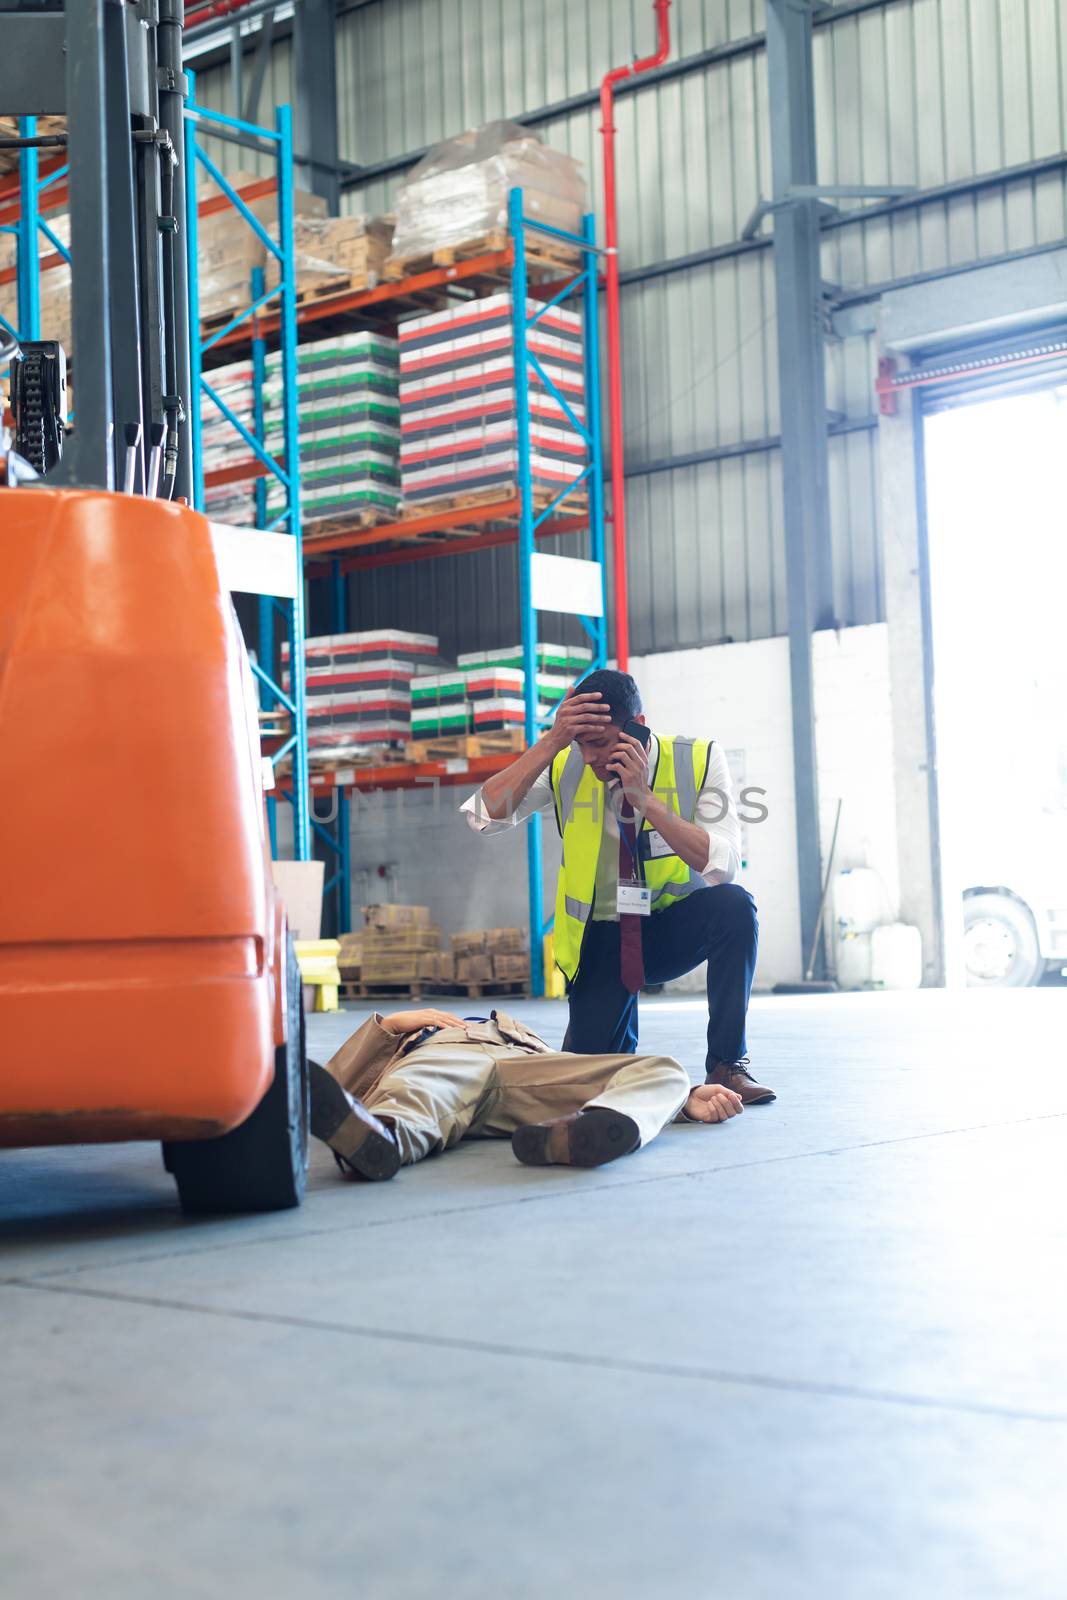 Front view of Caucasian Male supervisor talking on mobile phone while his coworker lying unconscious on the floor in warehouse. This is a freight transportation and distribution warehouse. Industrial and industrial workers concept